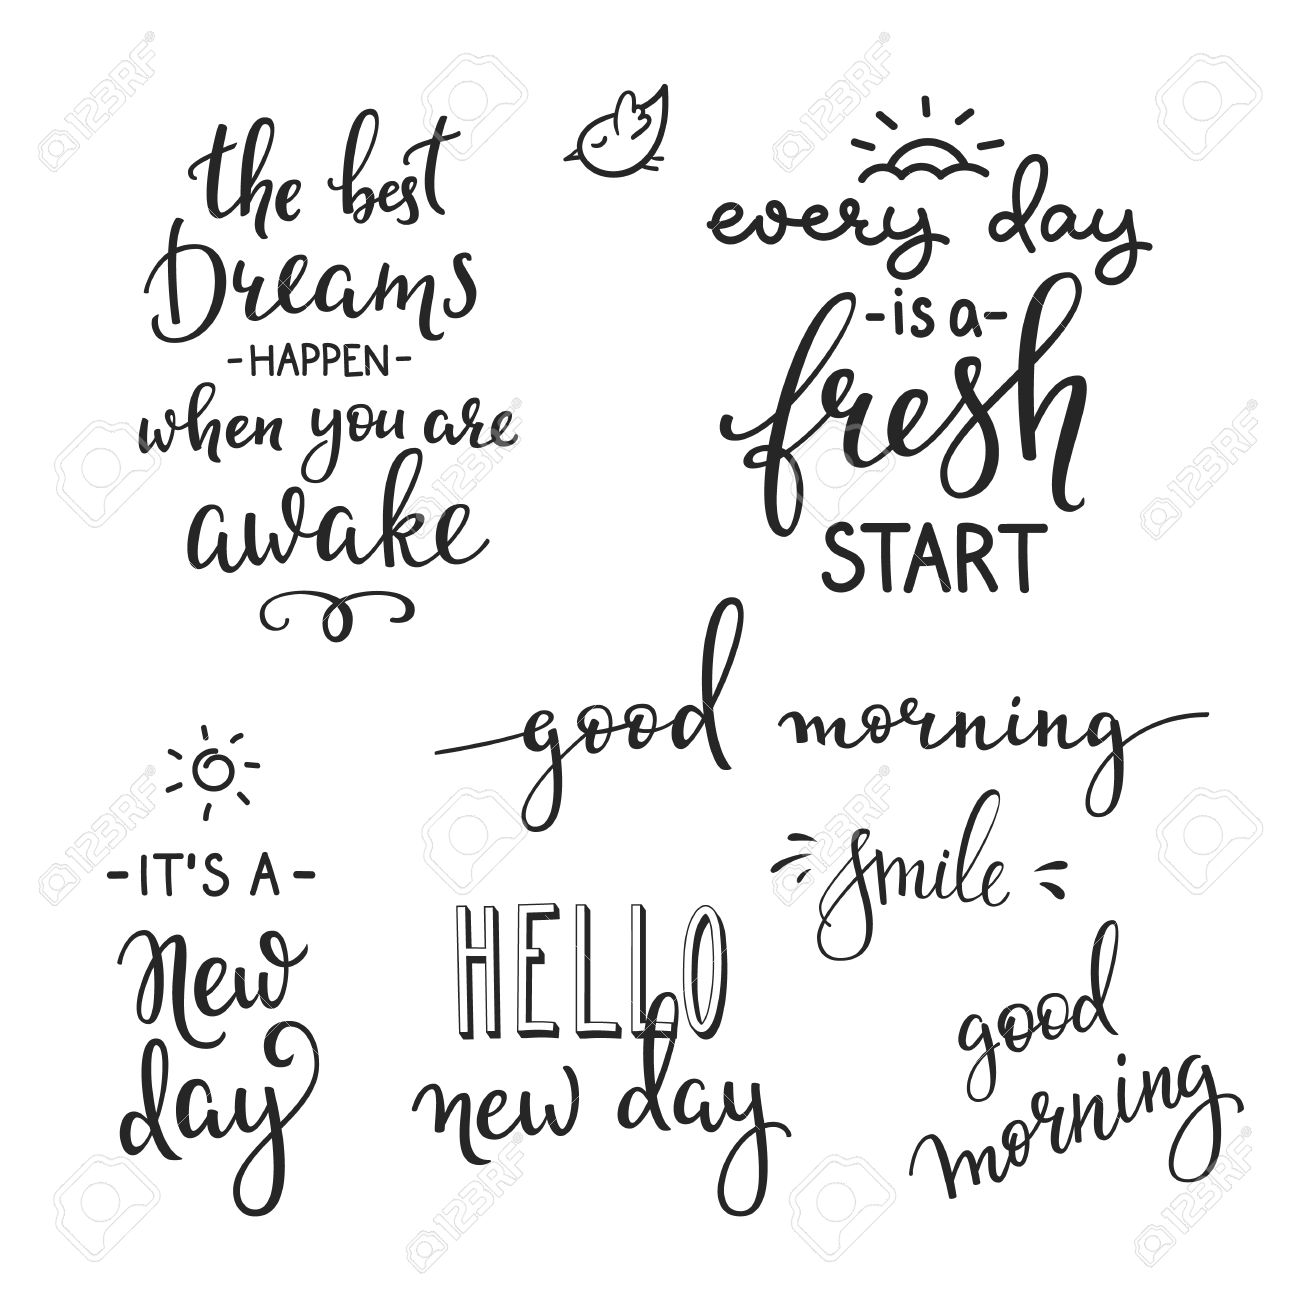 55617359-lettering-quotes-set-motivation-for-life-and-happiness-calligraphy-inspirational-quote-morning-motiv-Stock-Vector.jpg